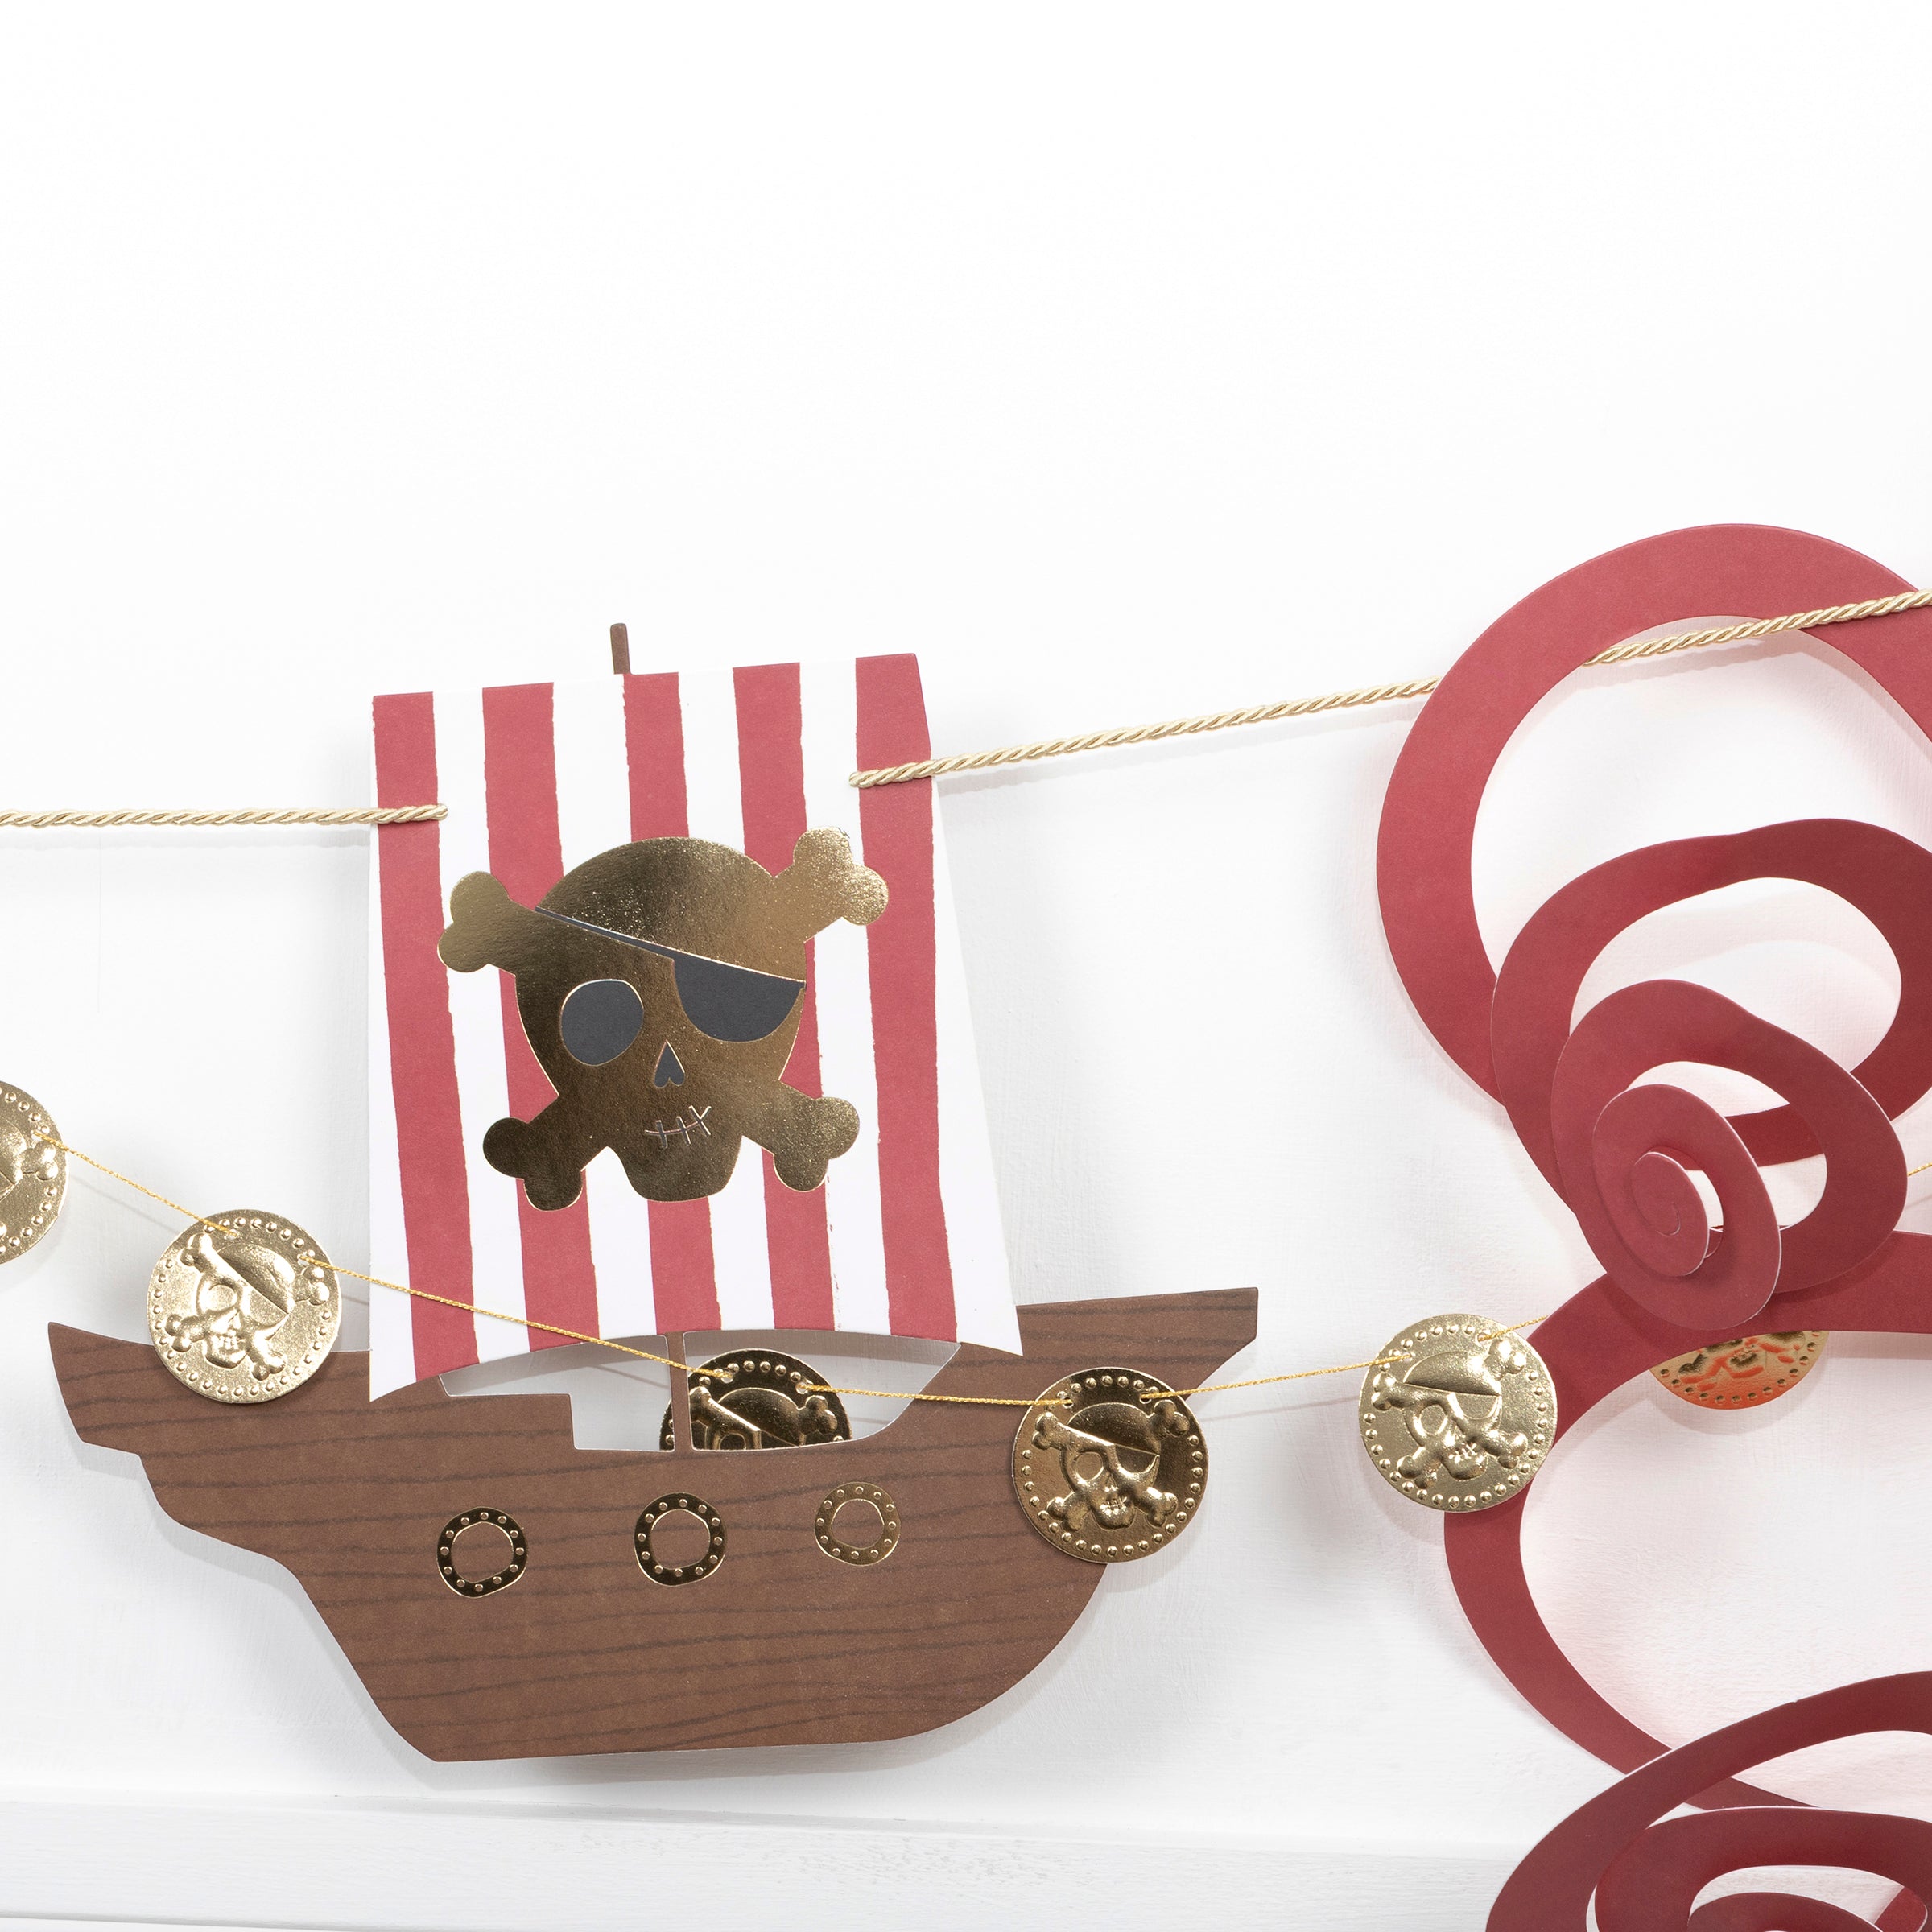 Our party garland is perfect for a pirate birthday party as it features pirate decorations including skull-and-crossbones and a pirate ship.